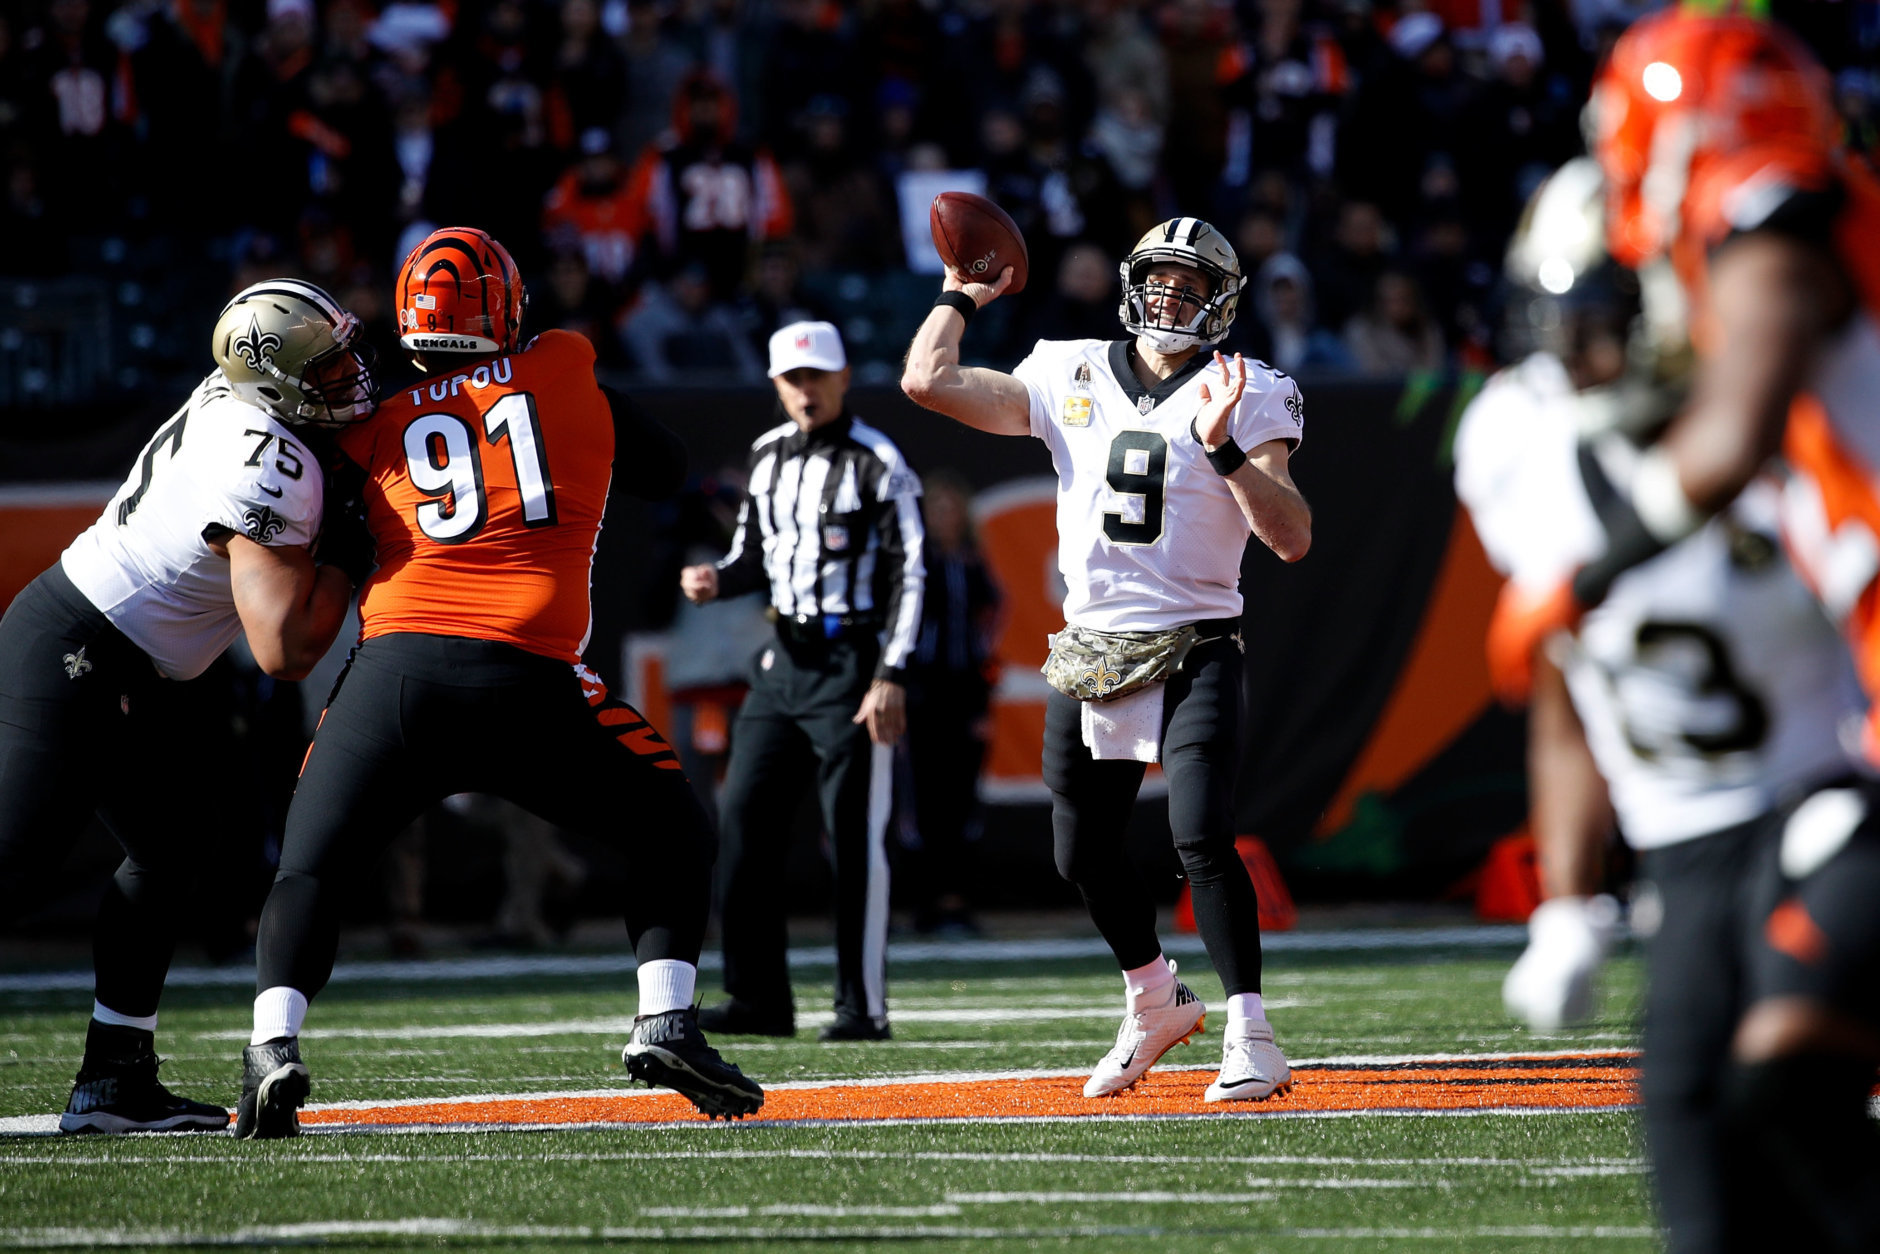 CINCINNATI, OH - NOVEMBER 11:  Drew Brees #9 of the New Orleans Saints throws a pass during the first quarter of the game against the Cincinnati Bengals at Paul Brown Stadium on November 11, 2018 in Cincinnati, Ohio. (Photo by Joe Robbins/Getty Images)